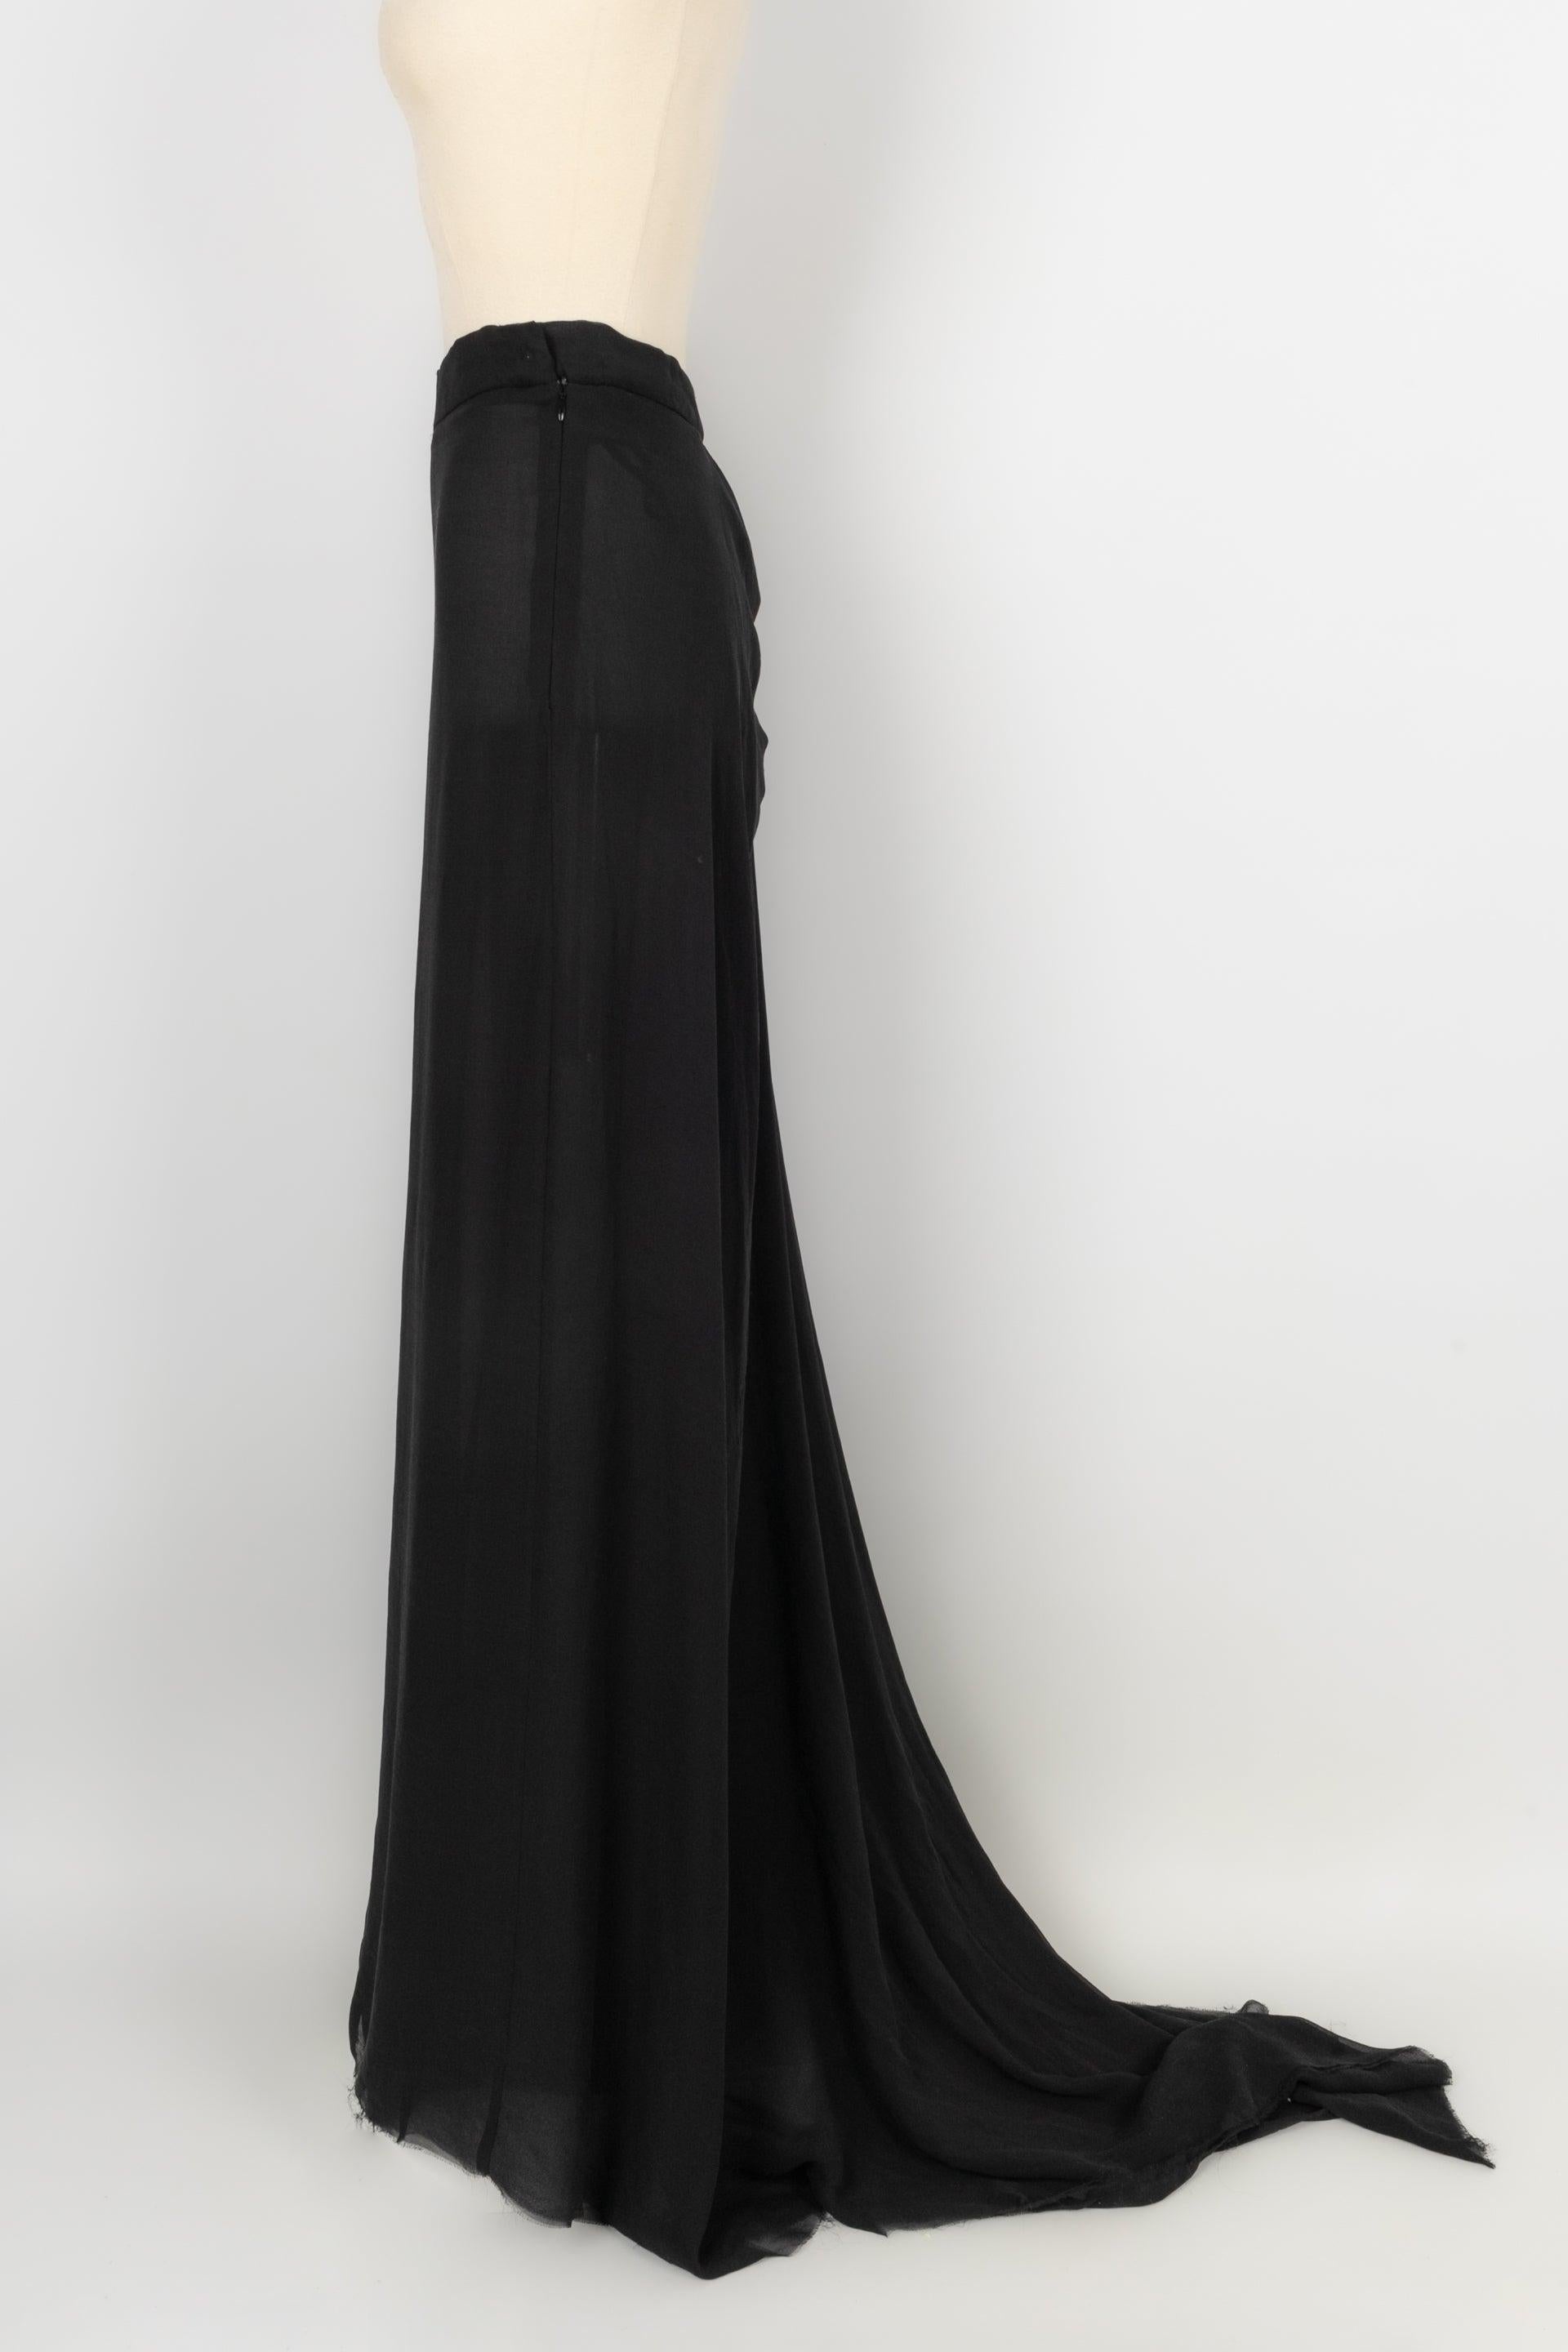 Vivienne Westwood - (Made in Italy) Black silk long asymmetrical skirt. Size 44FR.

Additional information:
Condition: Very good condition
Dimensions: Waist: 40 cm
Length: from 120 cm to 170 cm (approximately)

Seller reference: FJ9
